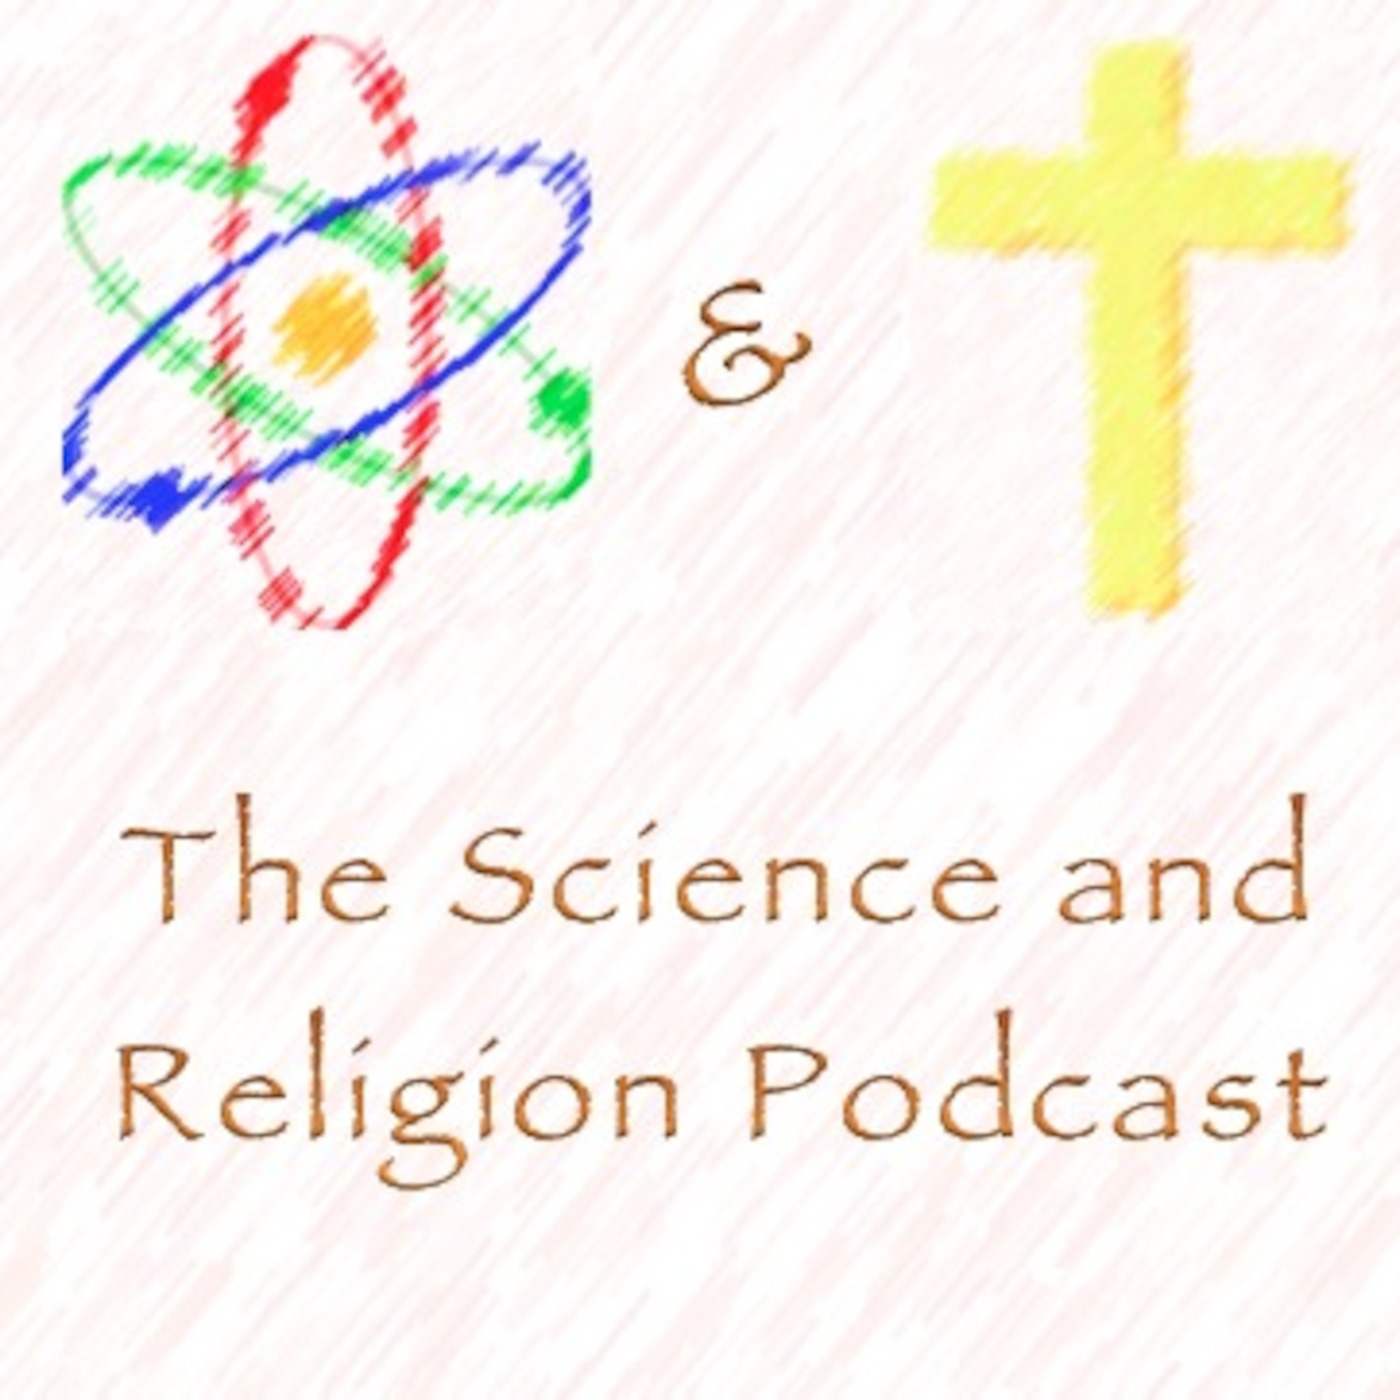 The Science and Religion Podcast